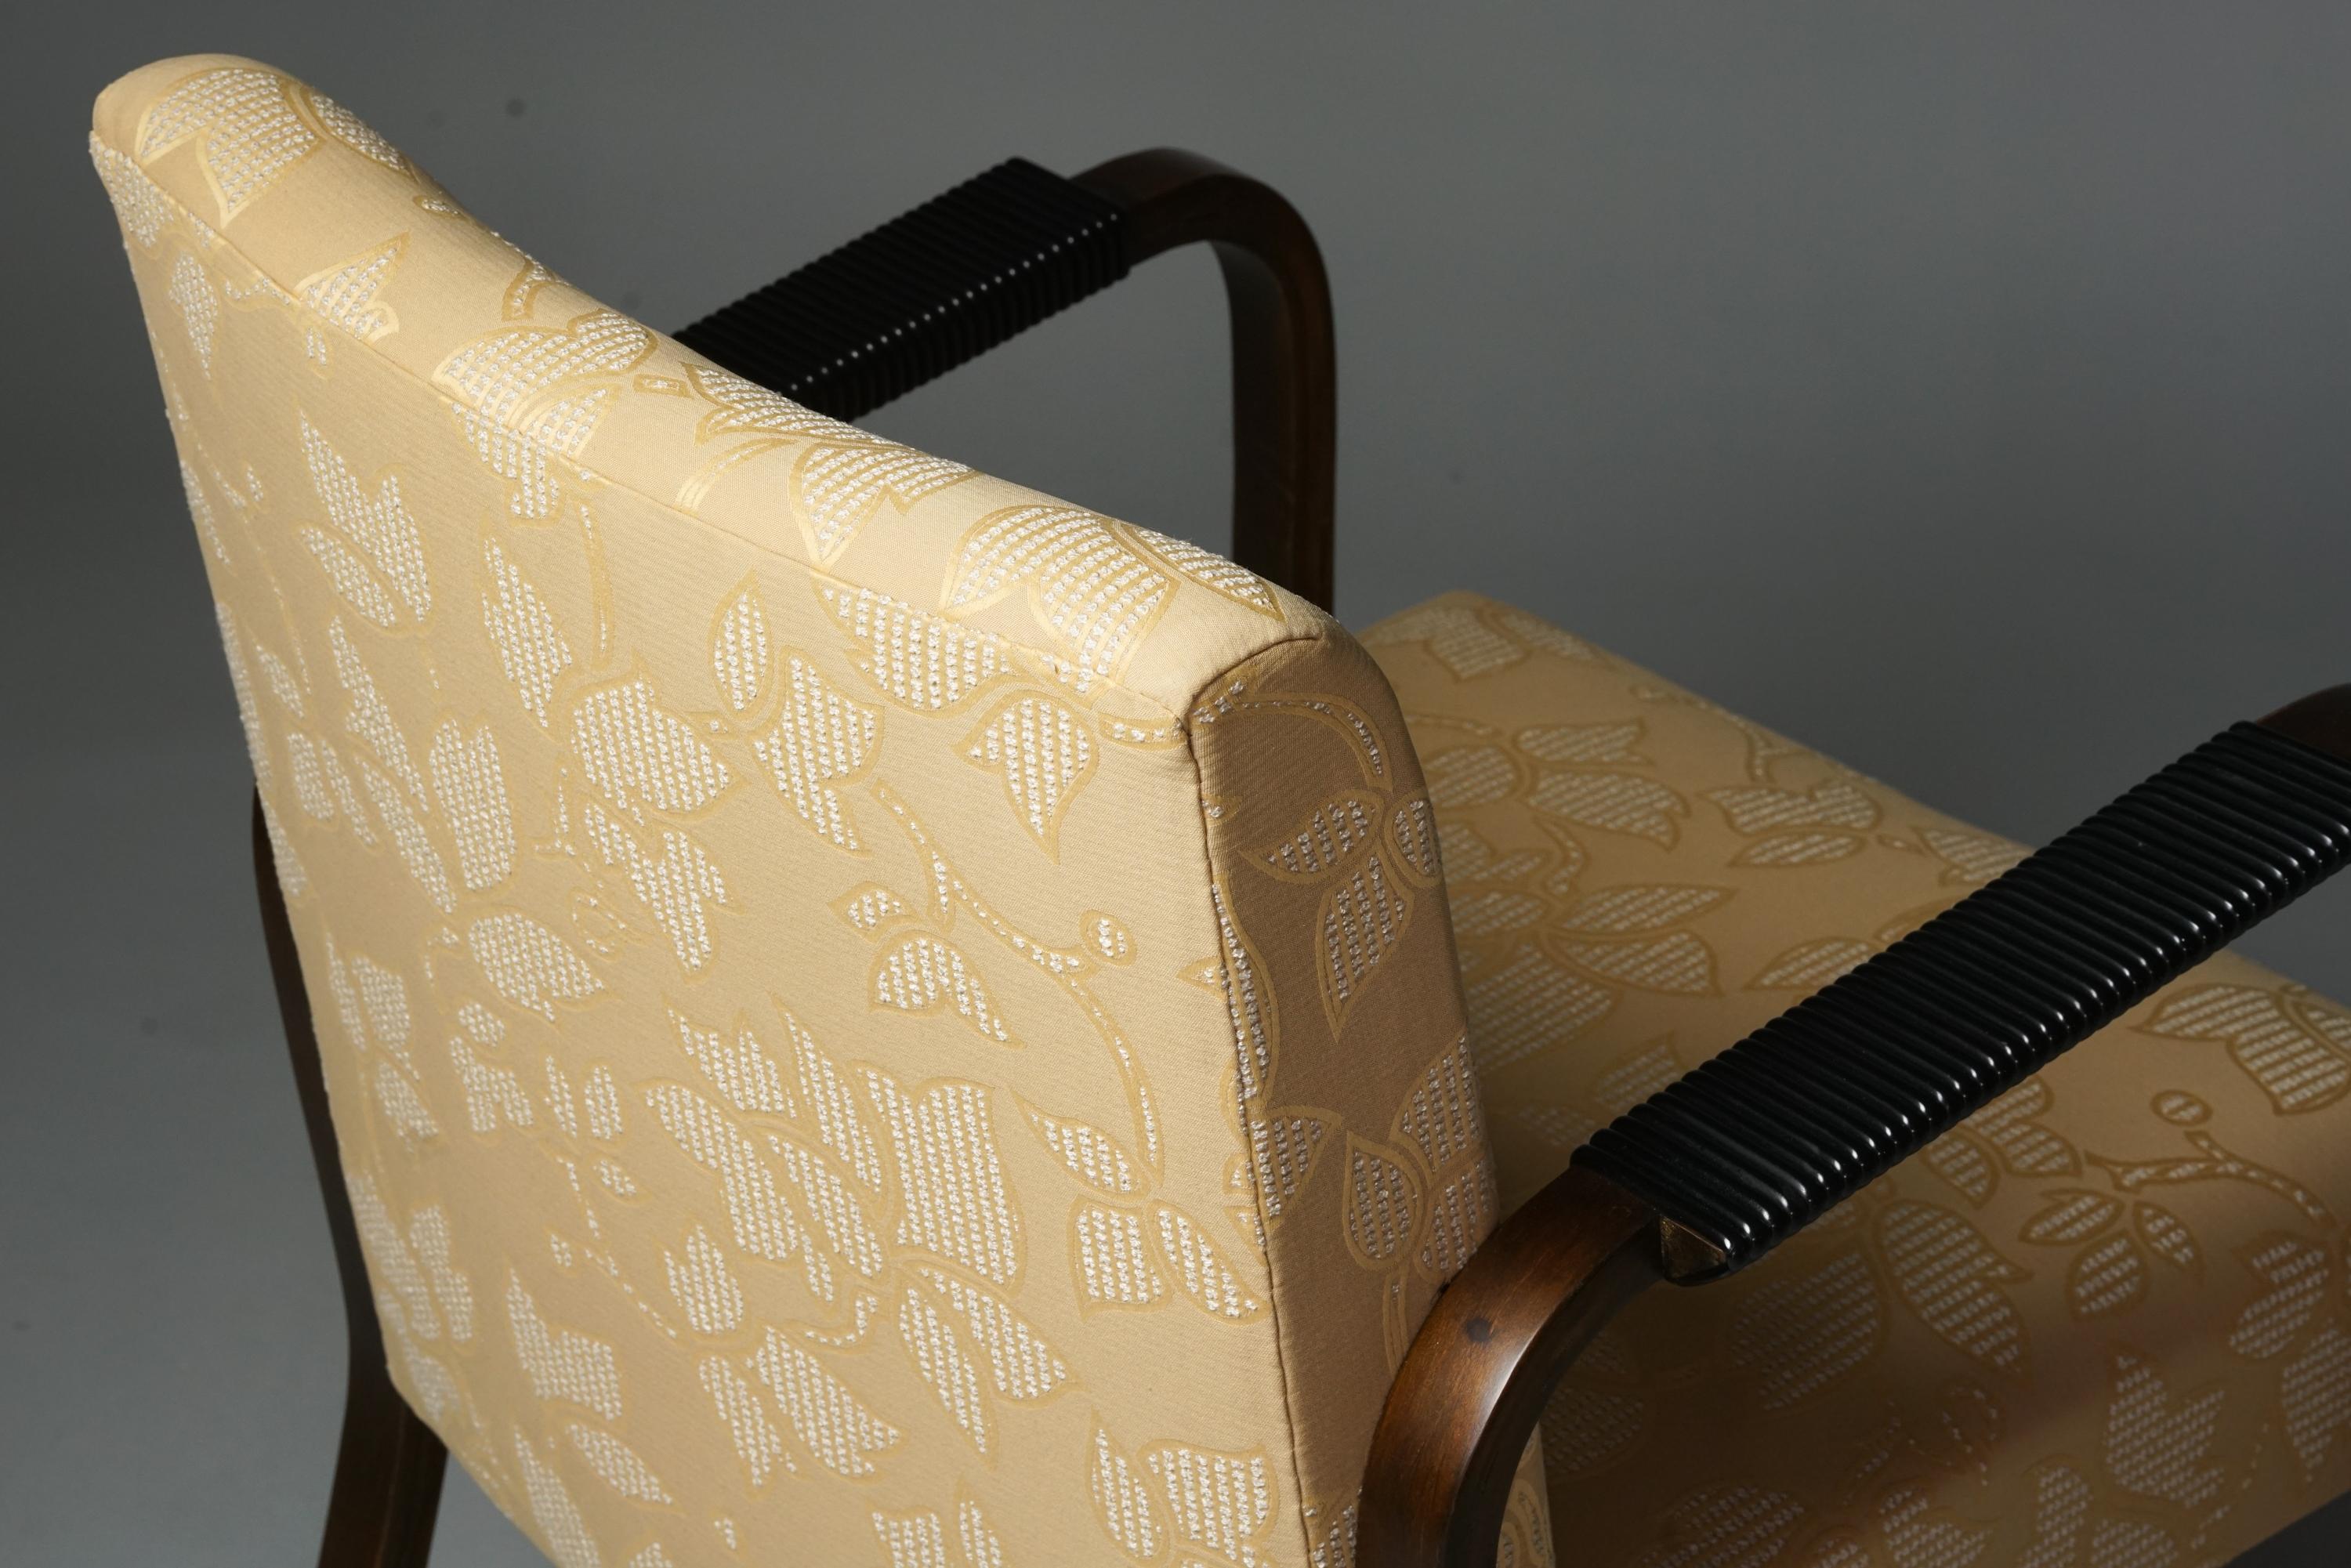 Model 46 Armchair with Floral Fabric, Alvar Aalto, 1930/1940s For Sale 1